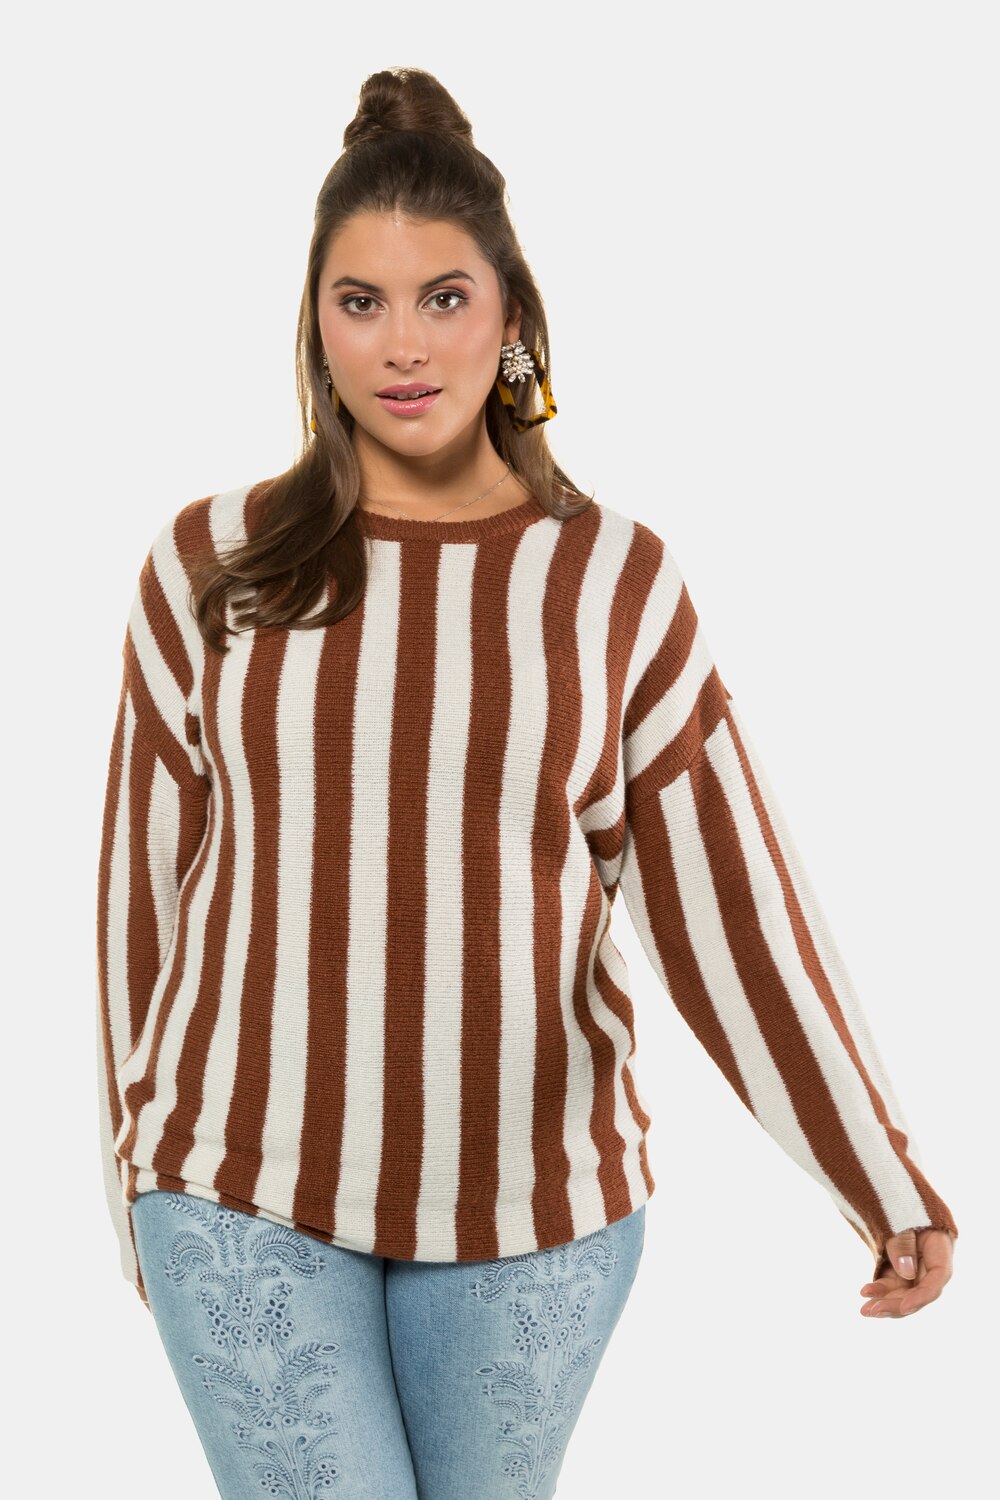 Plus Size Vertical Stripe Round Neck Long Sleeve Sweater, Woman, brown, size: 16/18, synthetic fibers, Studio Untold